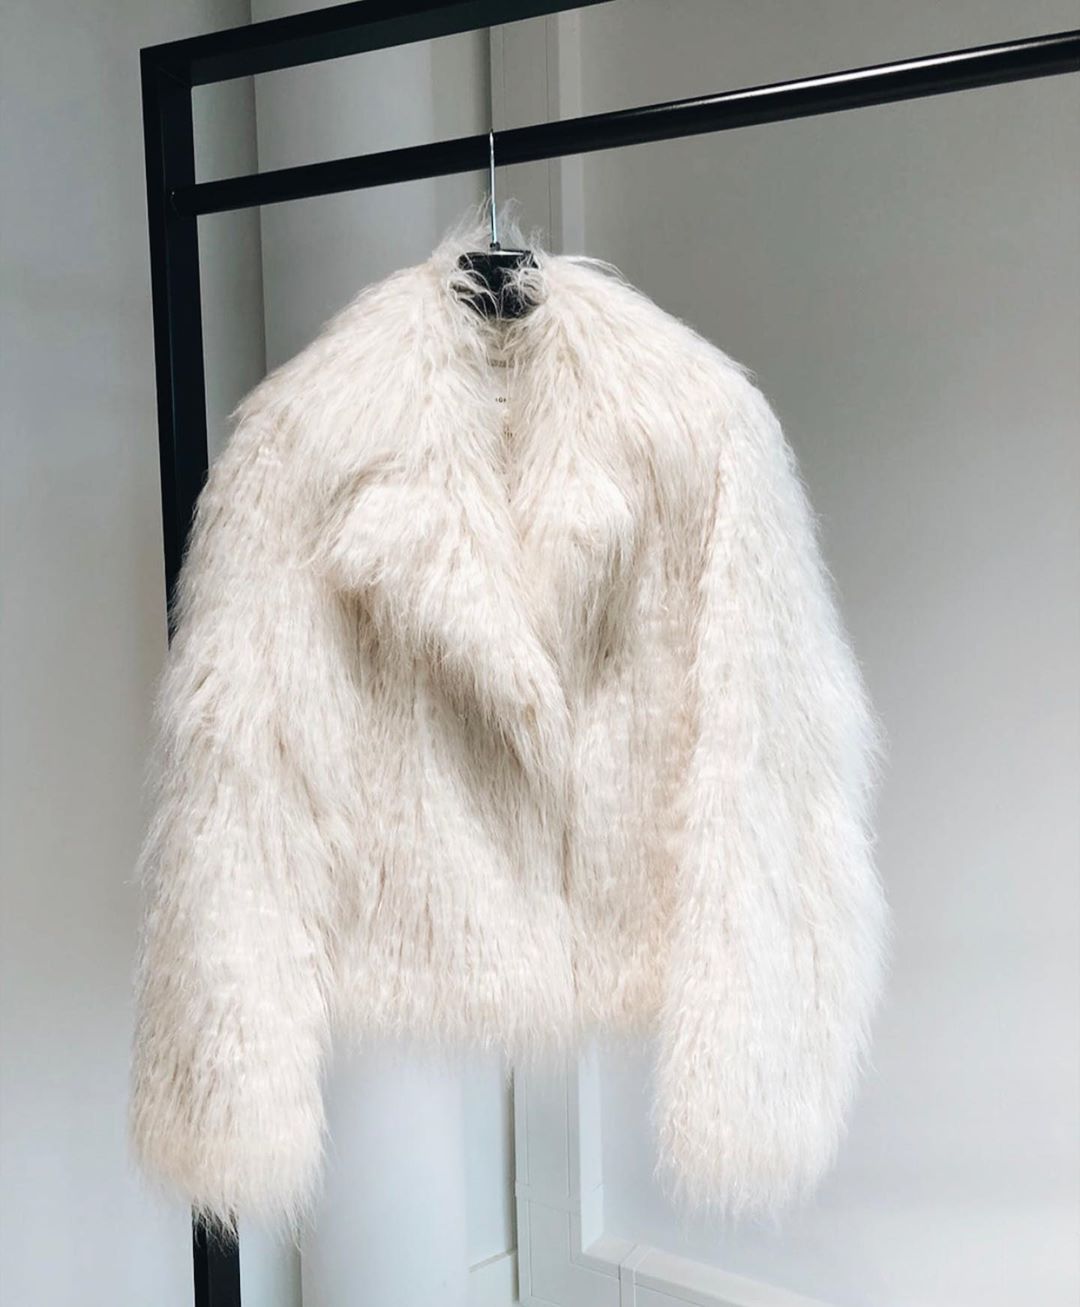 ＢＥＡＵＭＯＮＴ - Our fluffy one🤍 #warm #beaumont #beaumontbeauties #BB #coat #colddays #winteriscoming #mondaymood #favoritecoat #inlove #tap #shopnow